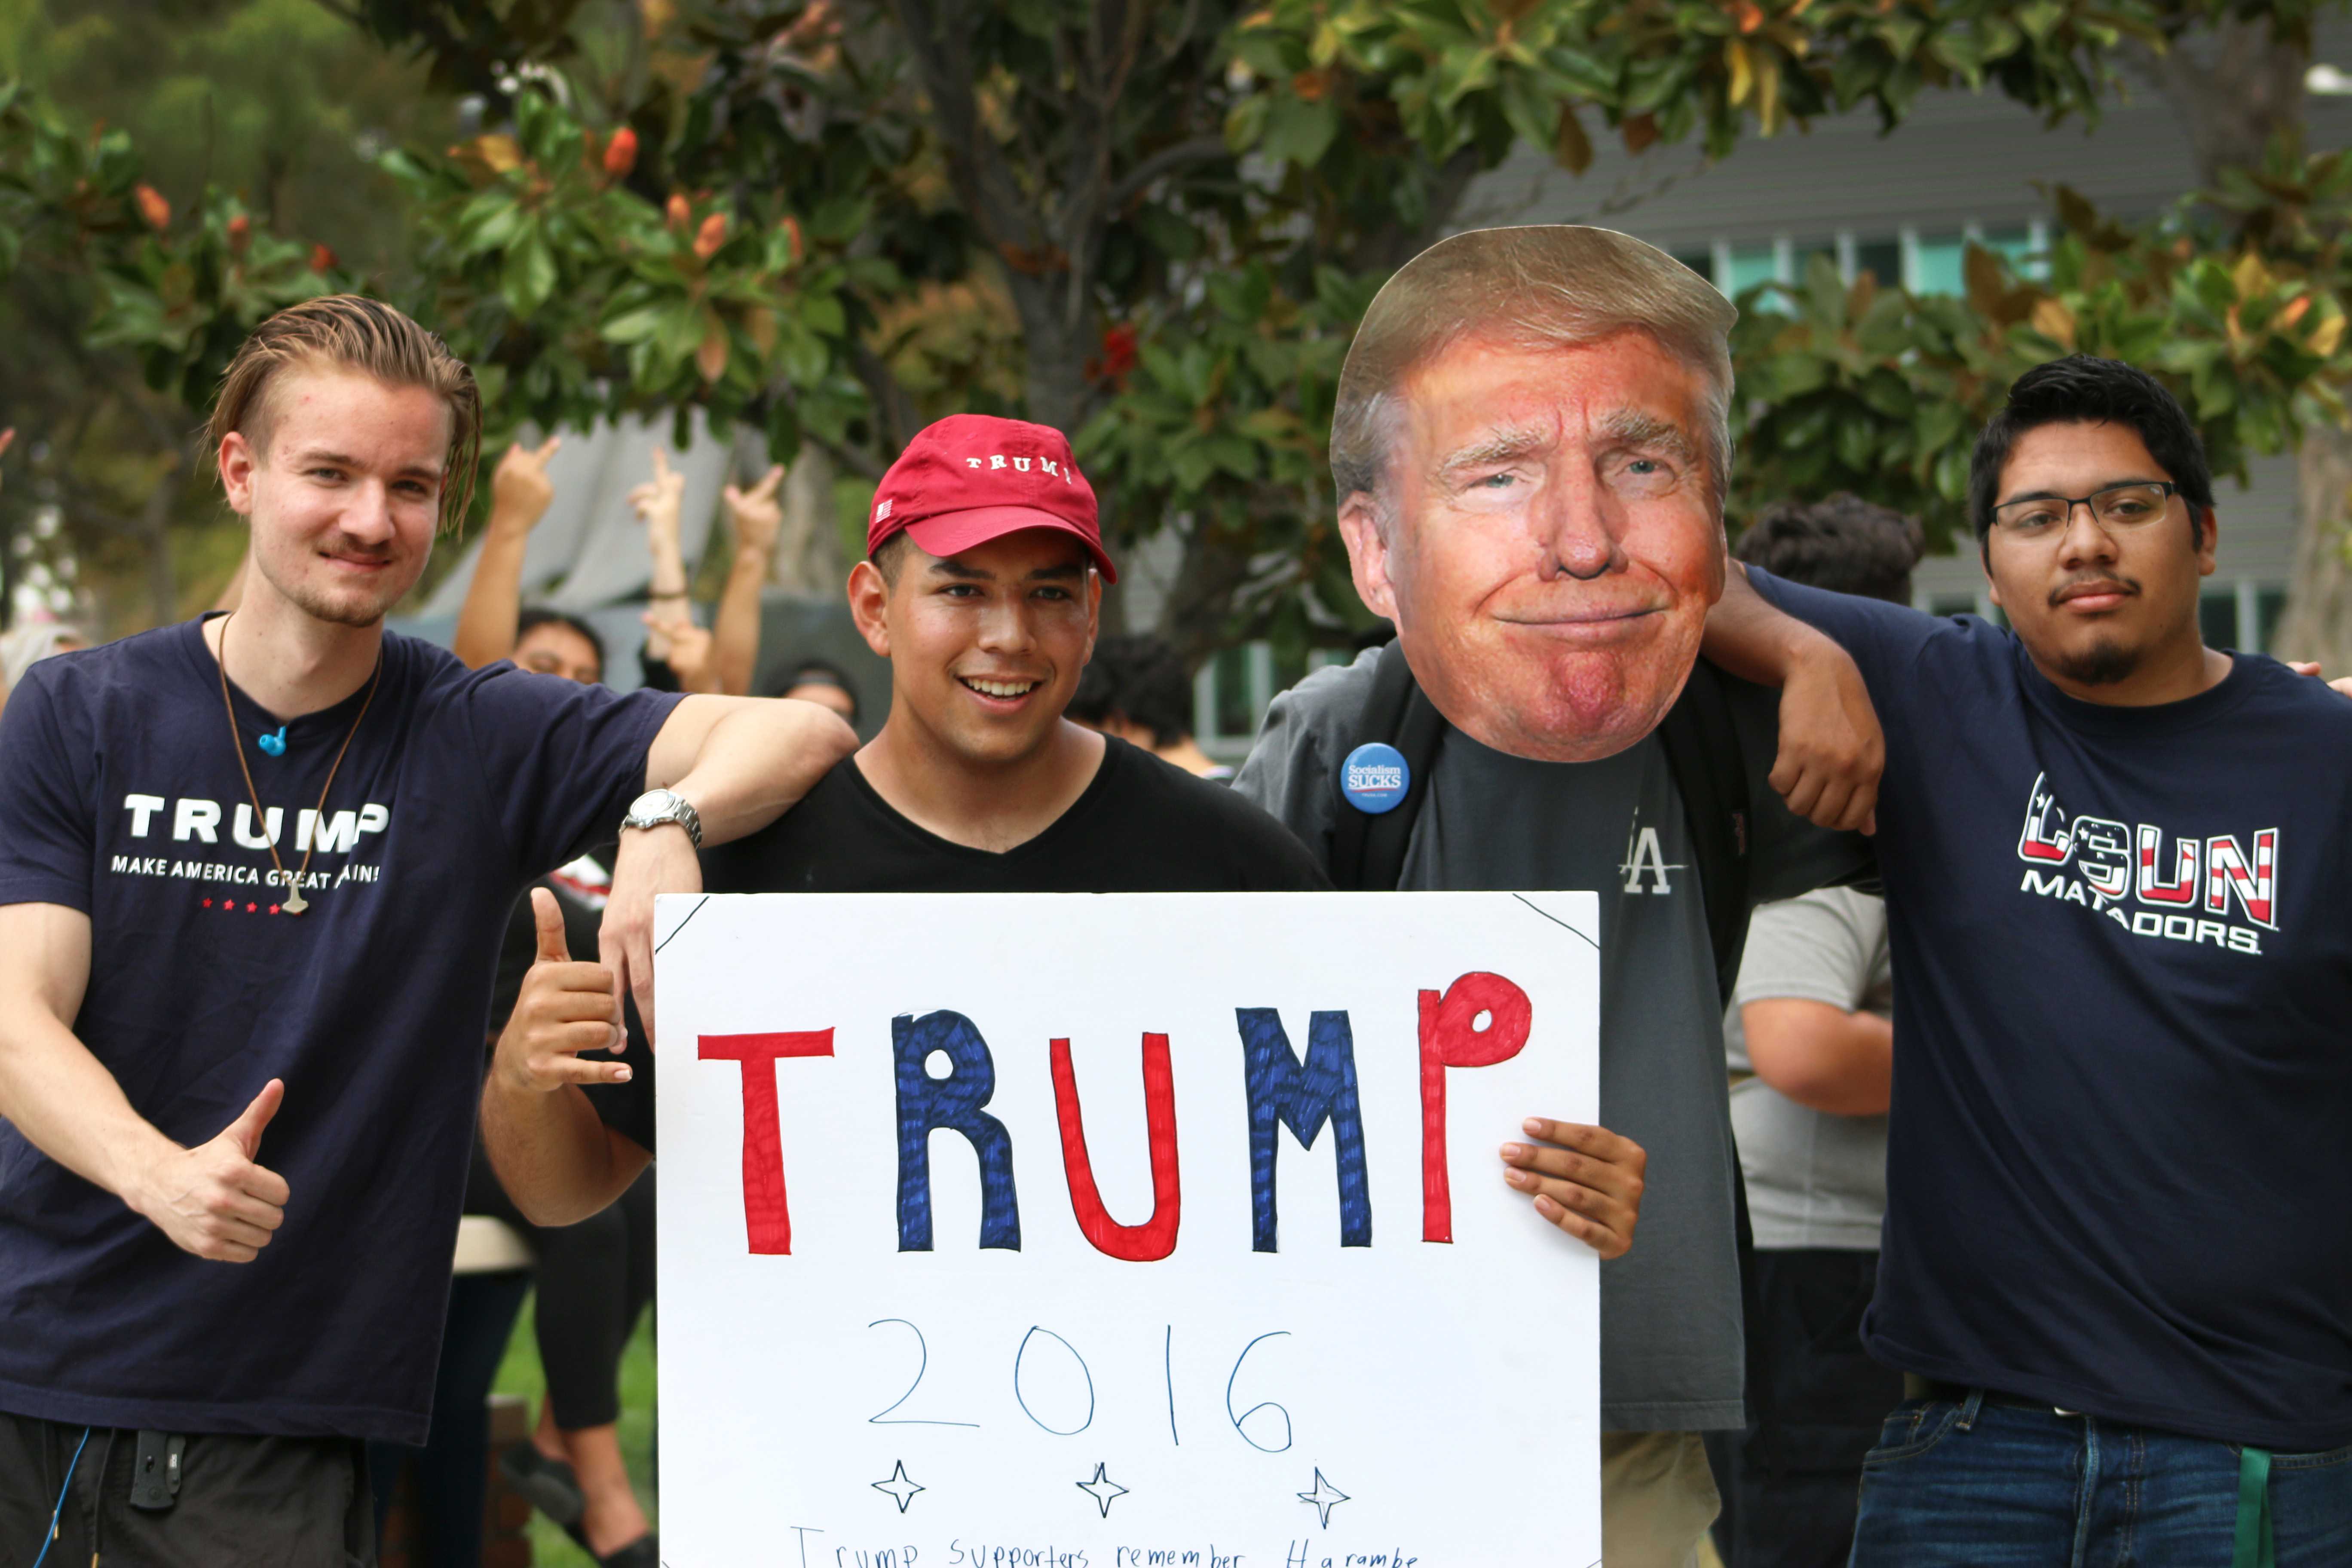 Trump+supporters+hold+up+trump+2016+poster+while+people+in+the+background+flip+them+off